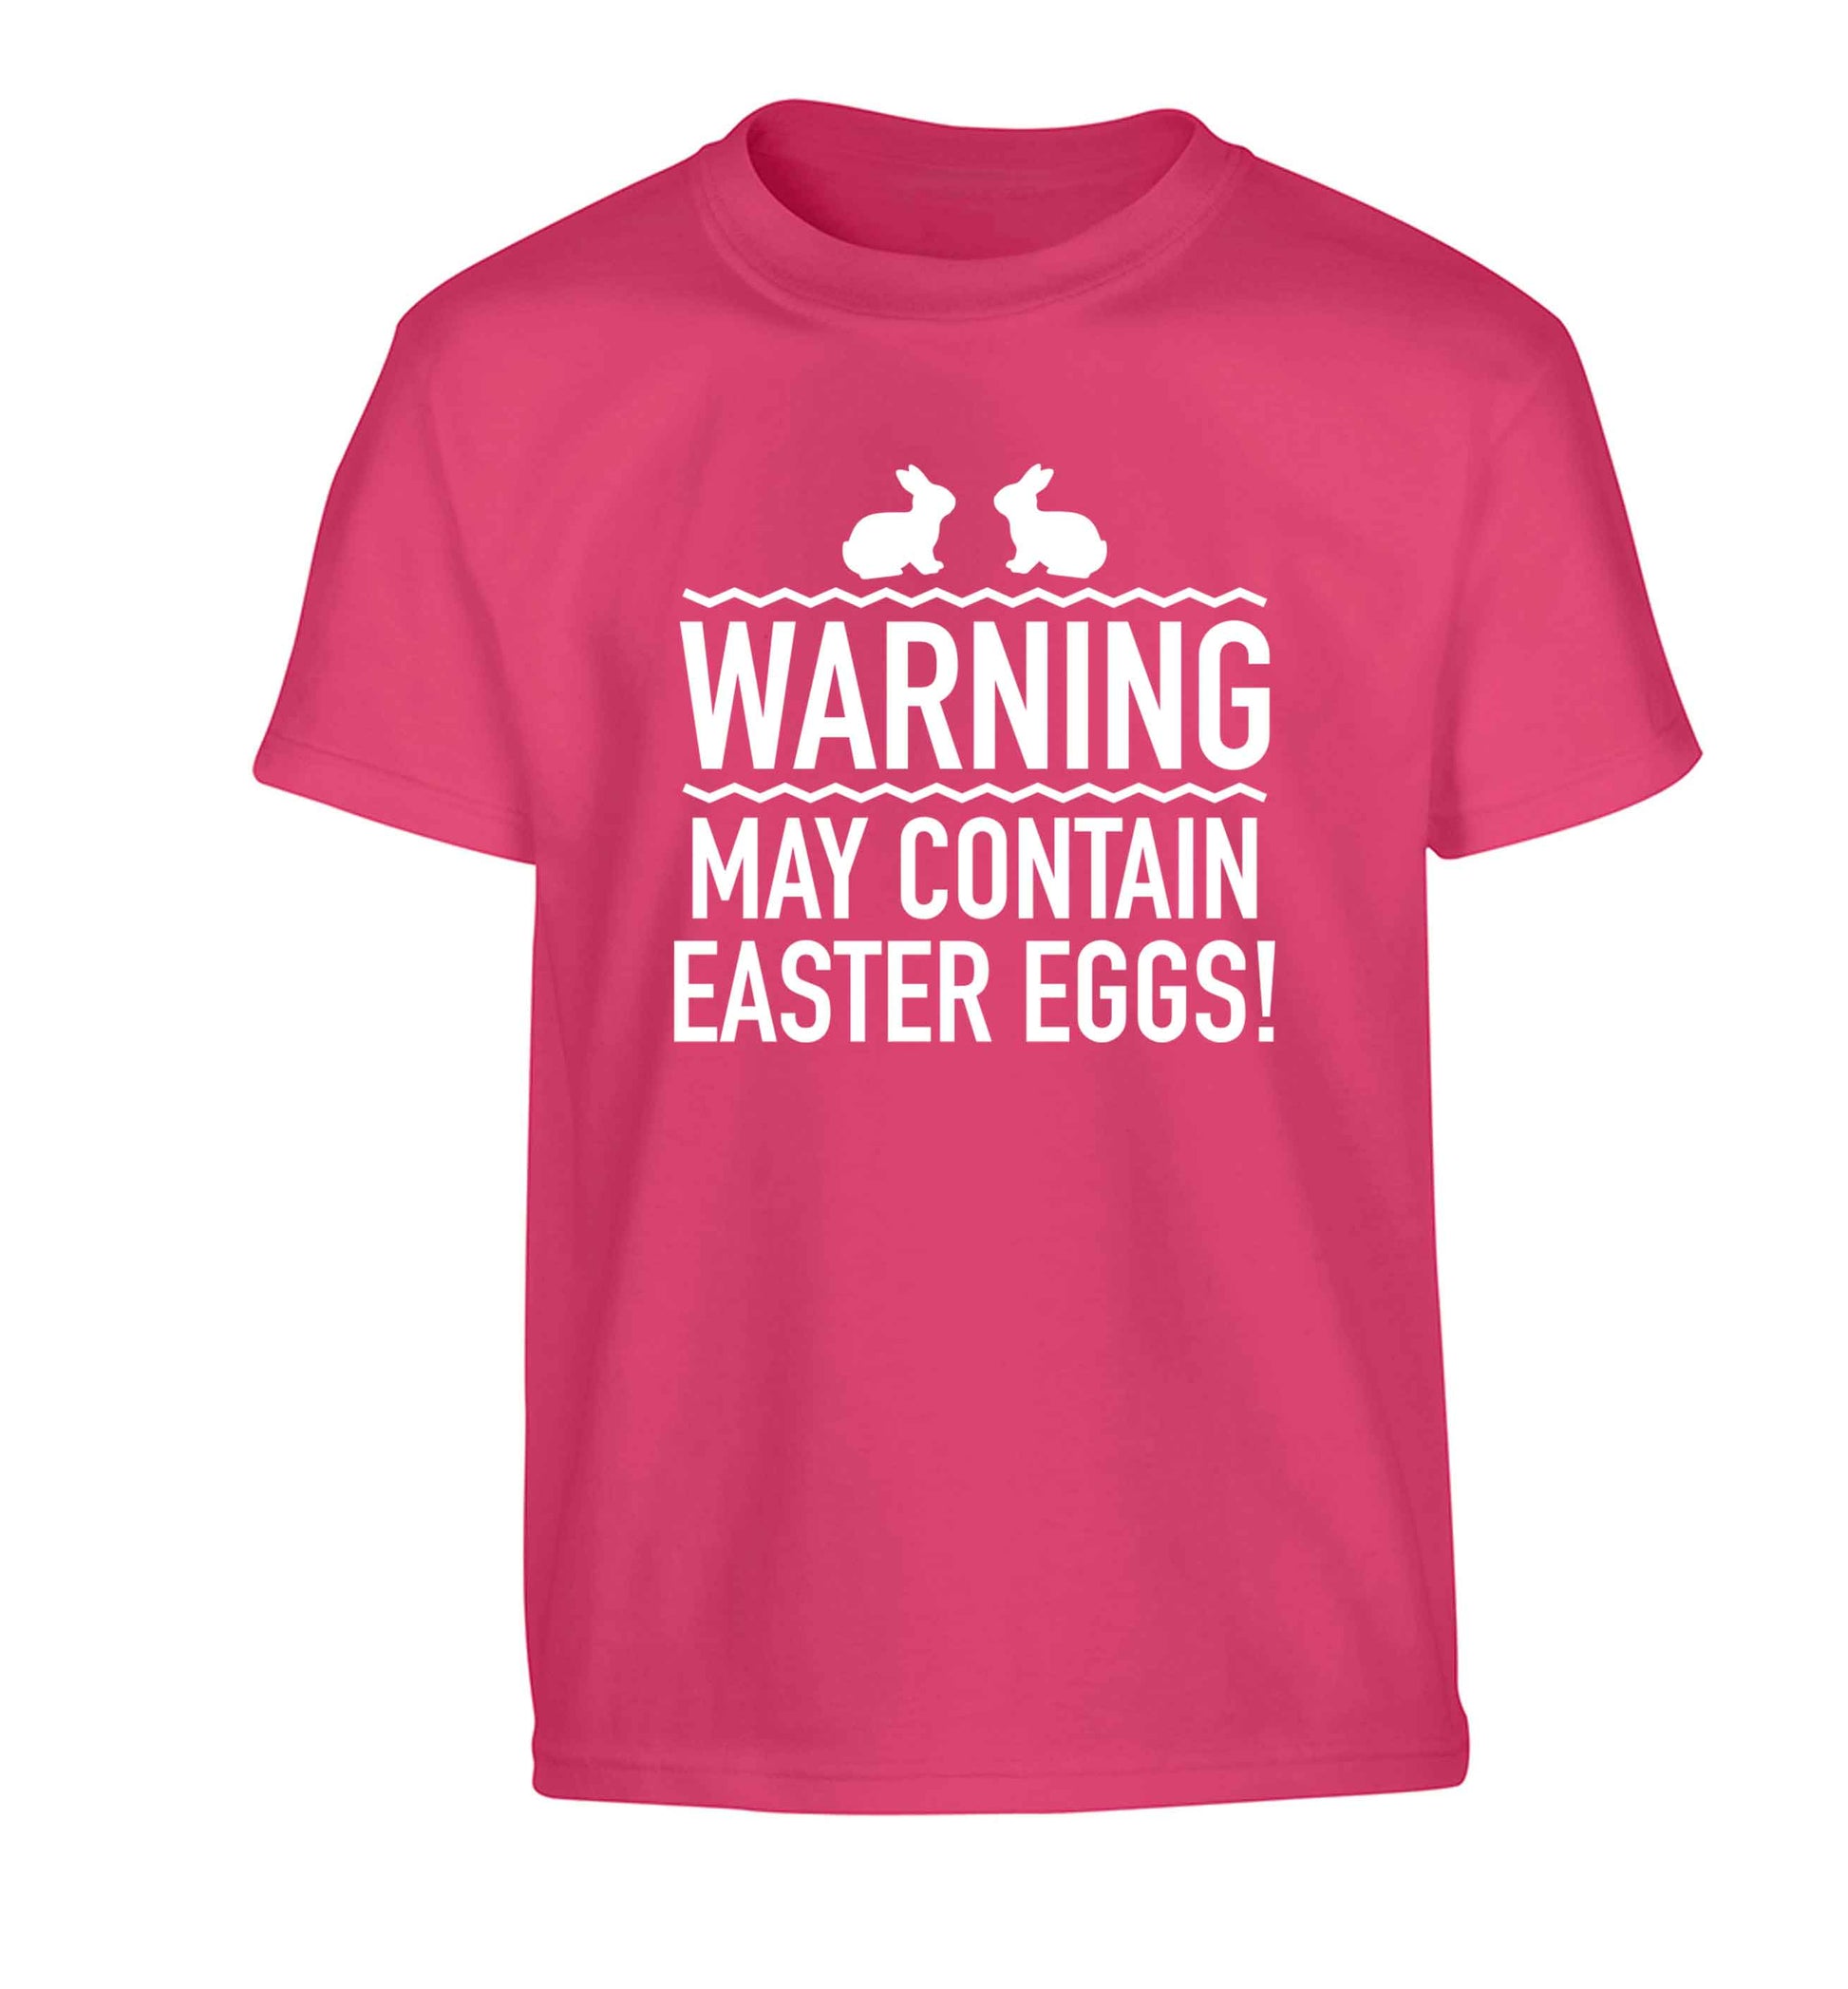 Warning may contain Easter eggs Children's pink Tshirt 12-13 Years